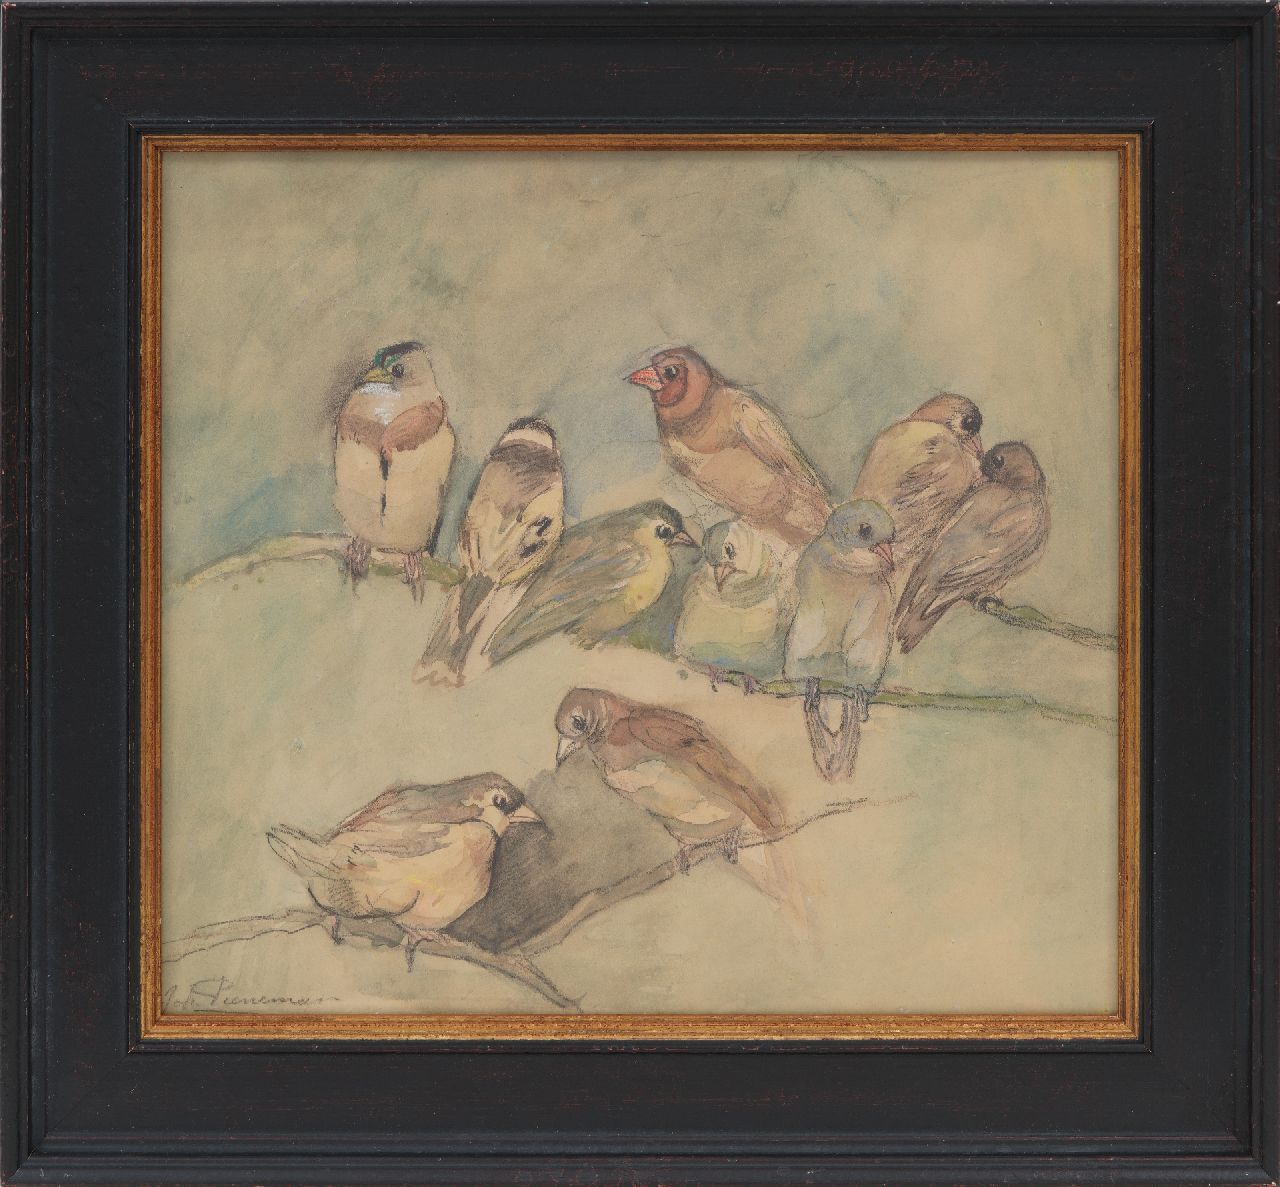 Pieneman J.H.  | 'Johanna' Hendrika Pieneman | Watercolours and drawings offered for sale | Finches, black chalk and watercolour on paper 30.3 x 33.5 cm, signed l.l.